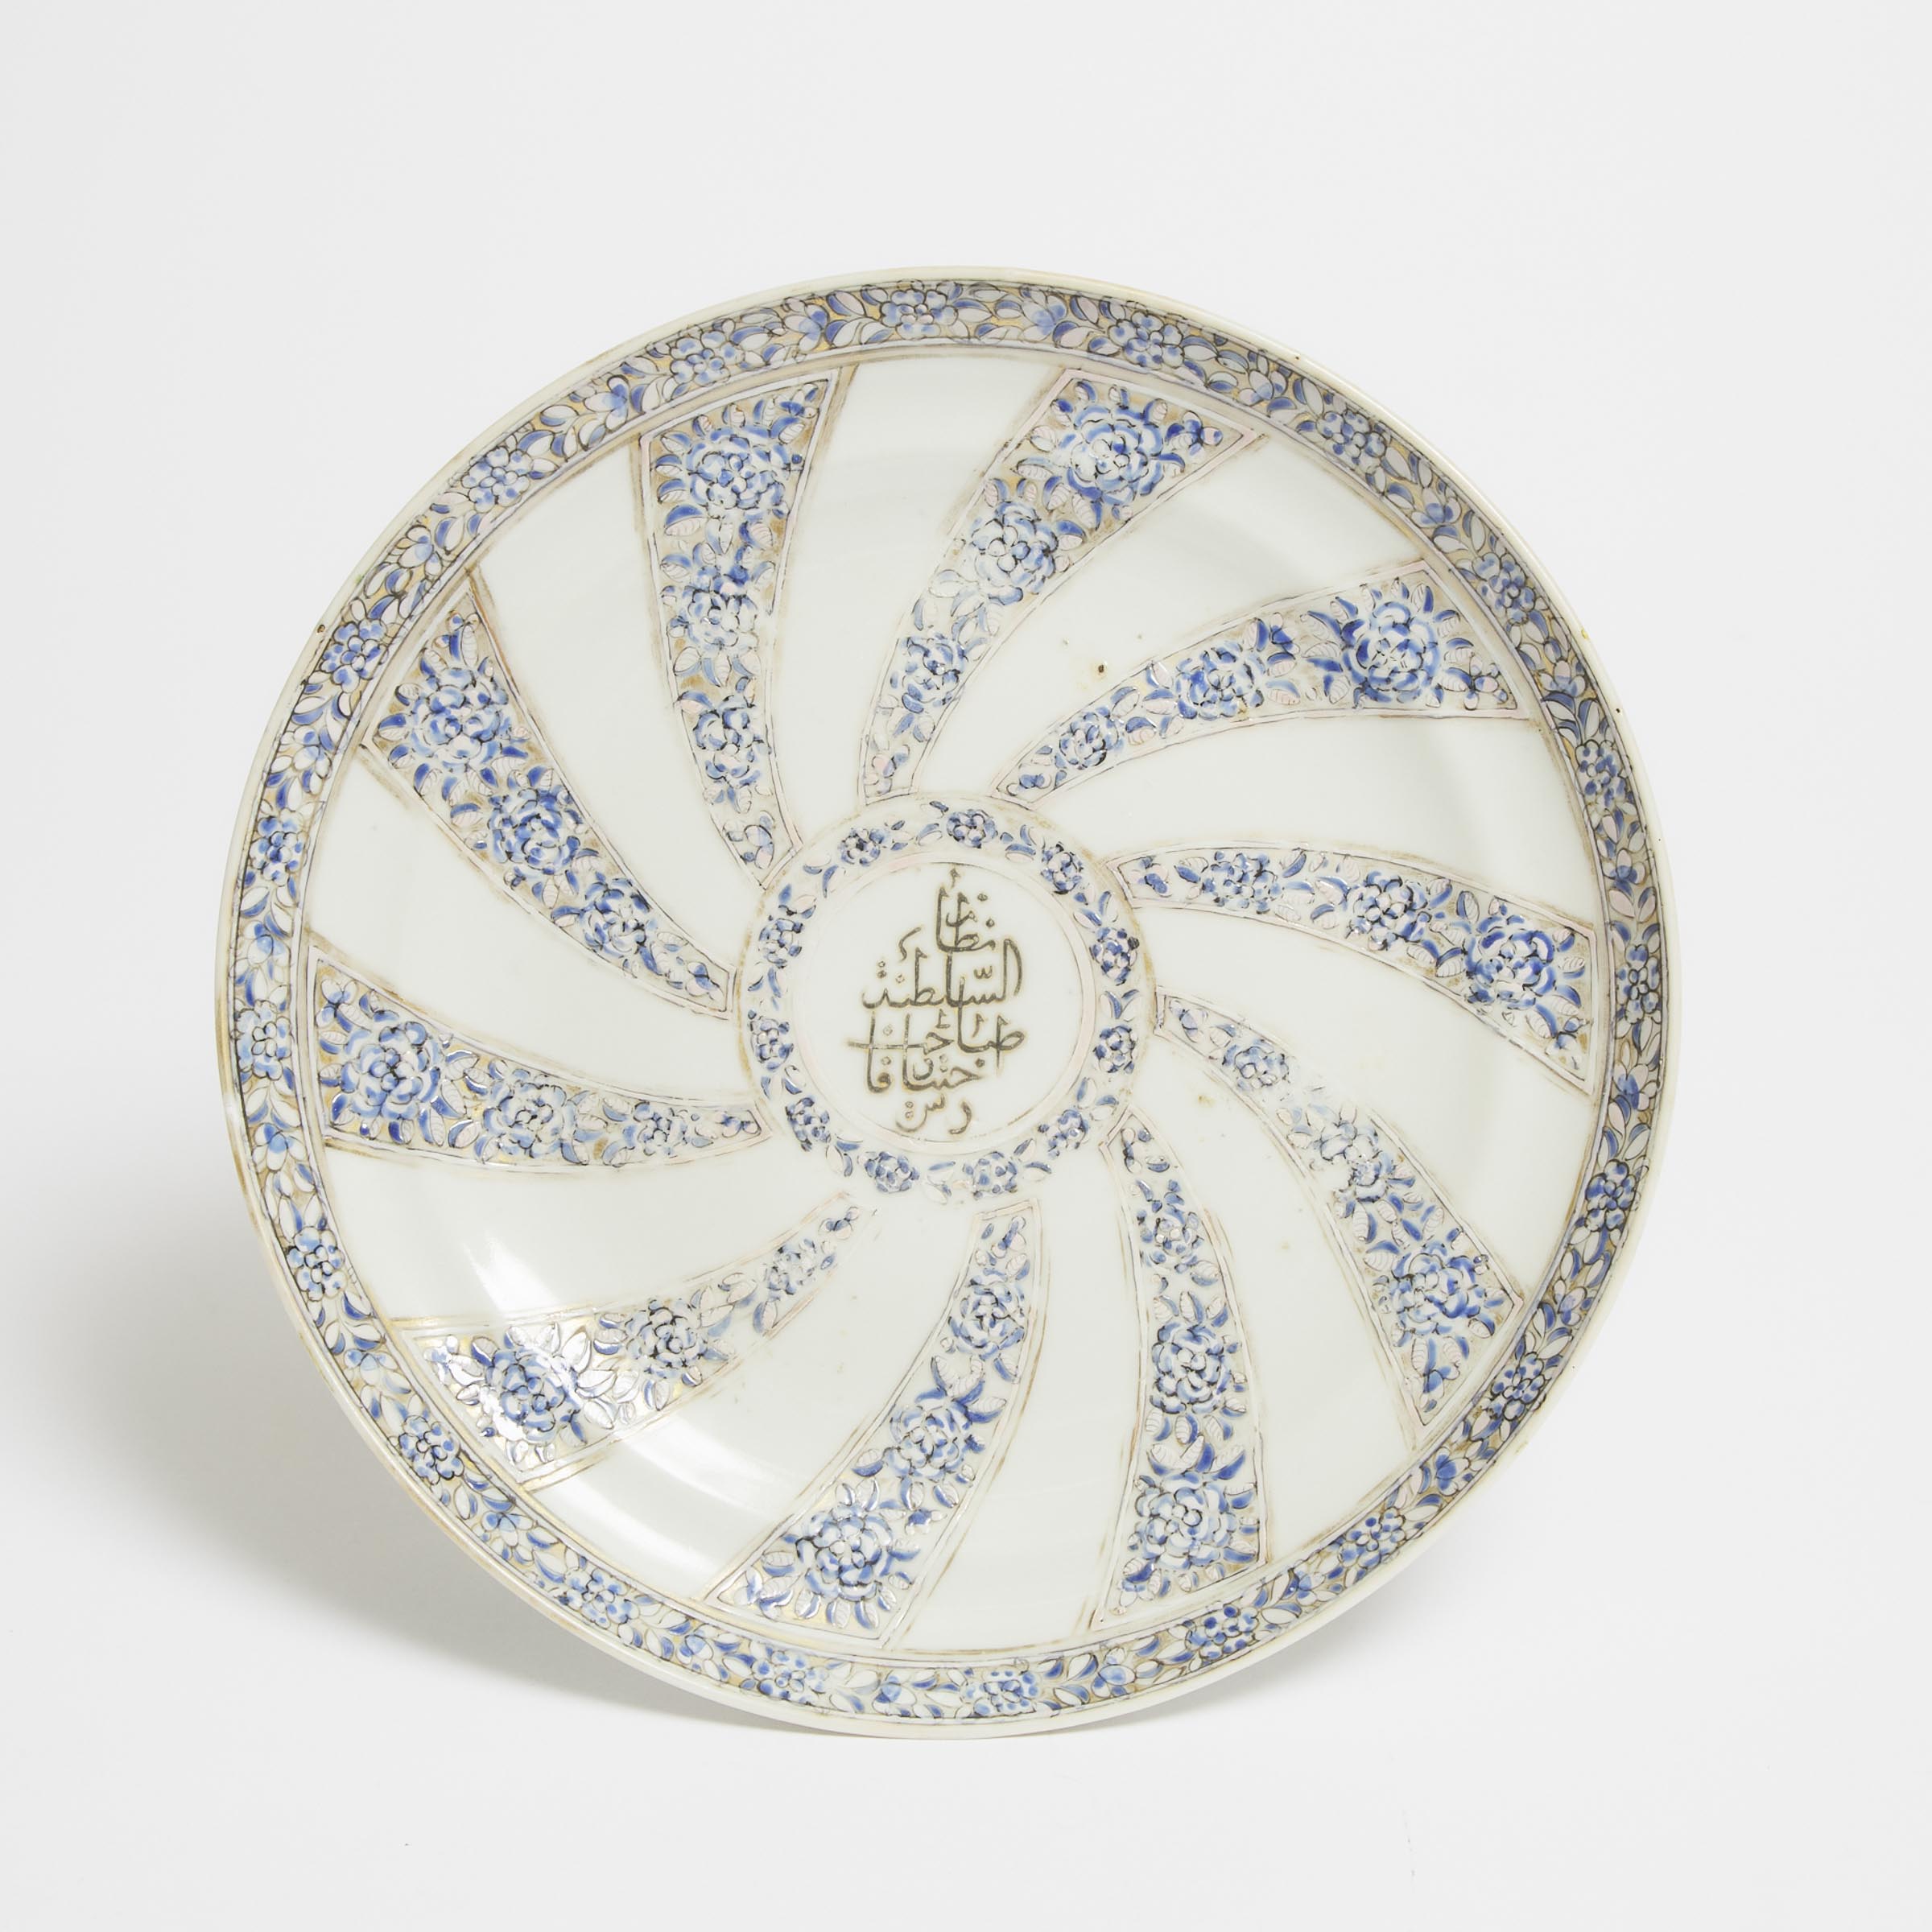 A Chinese Export Blue-Enameled